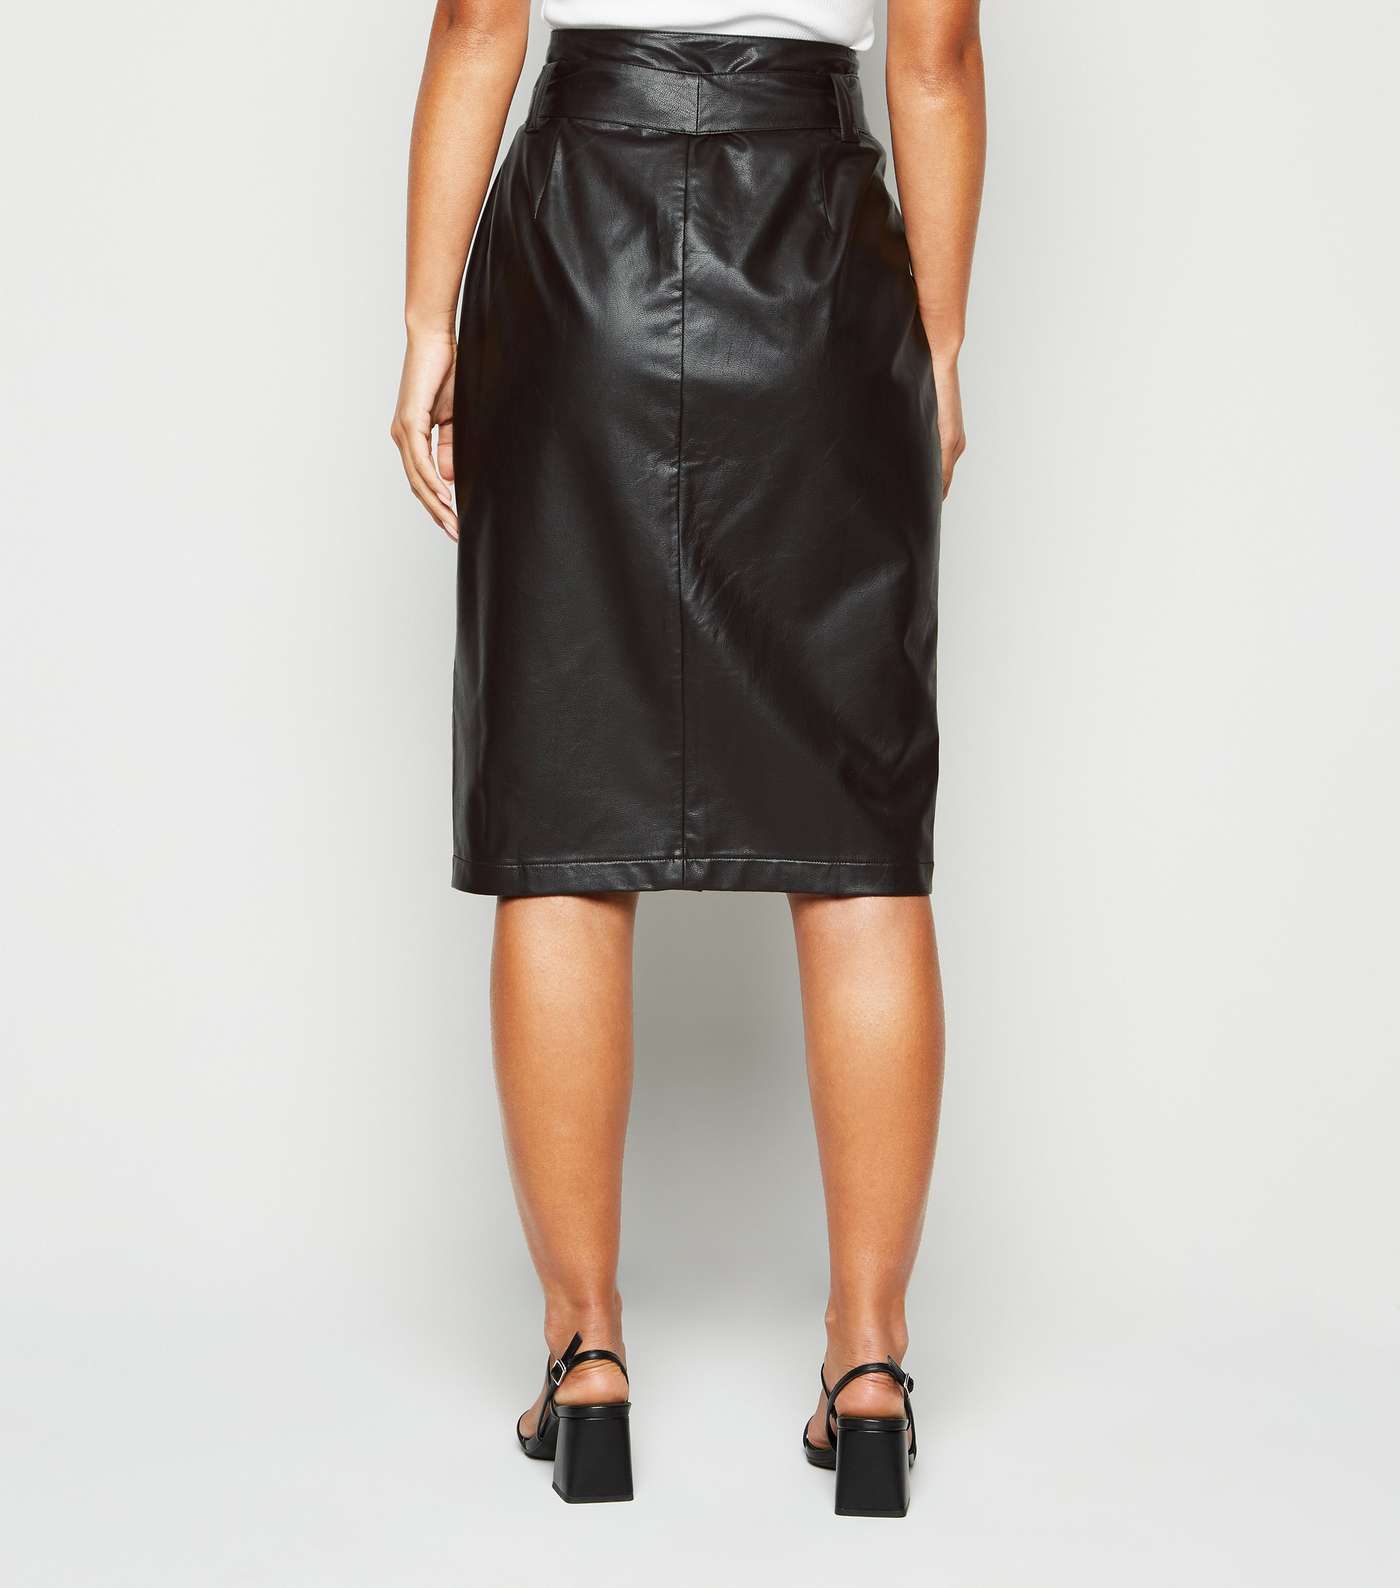 Petite Black Leather-Look Belted Pencil Skirt Image 3